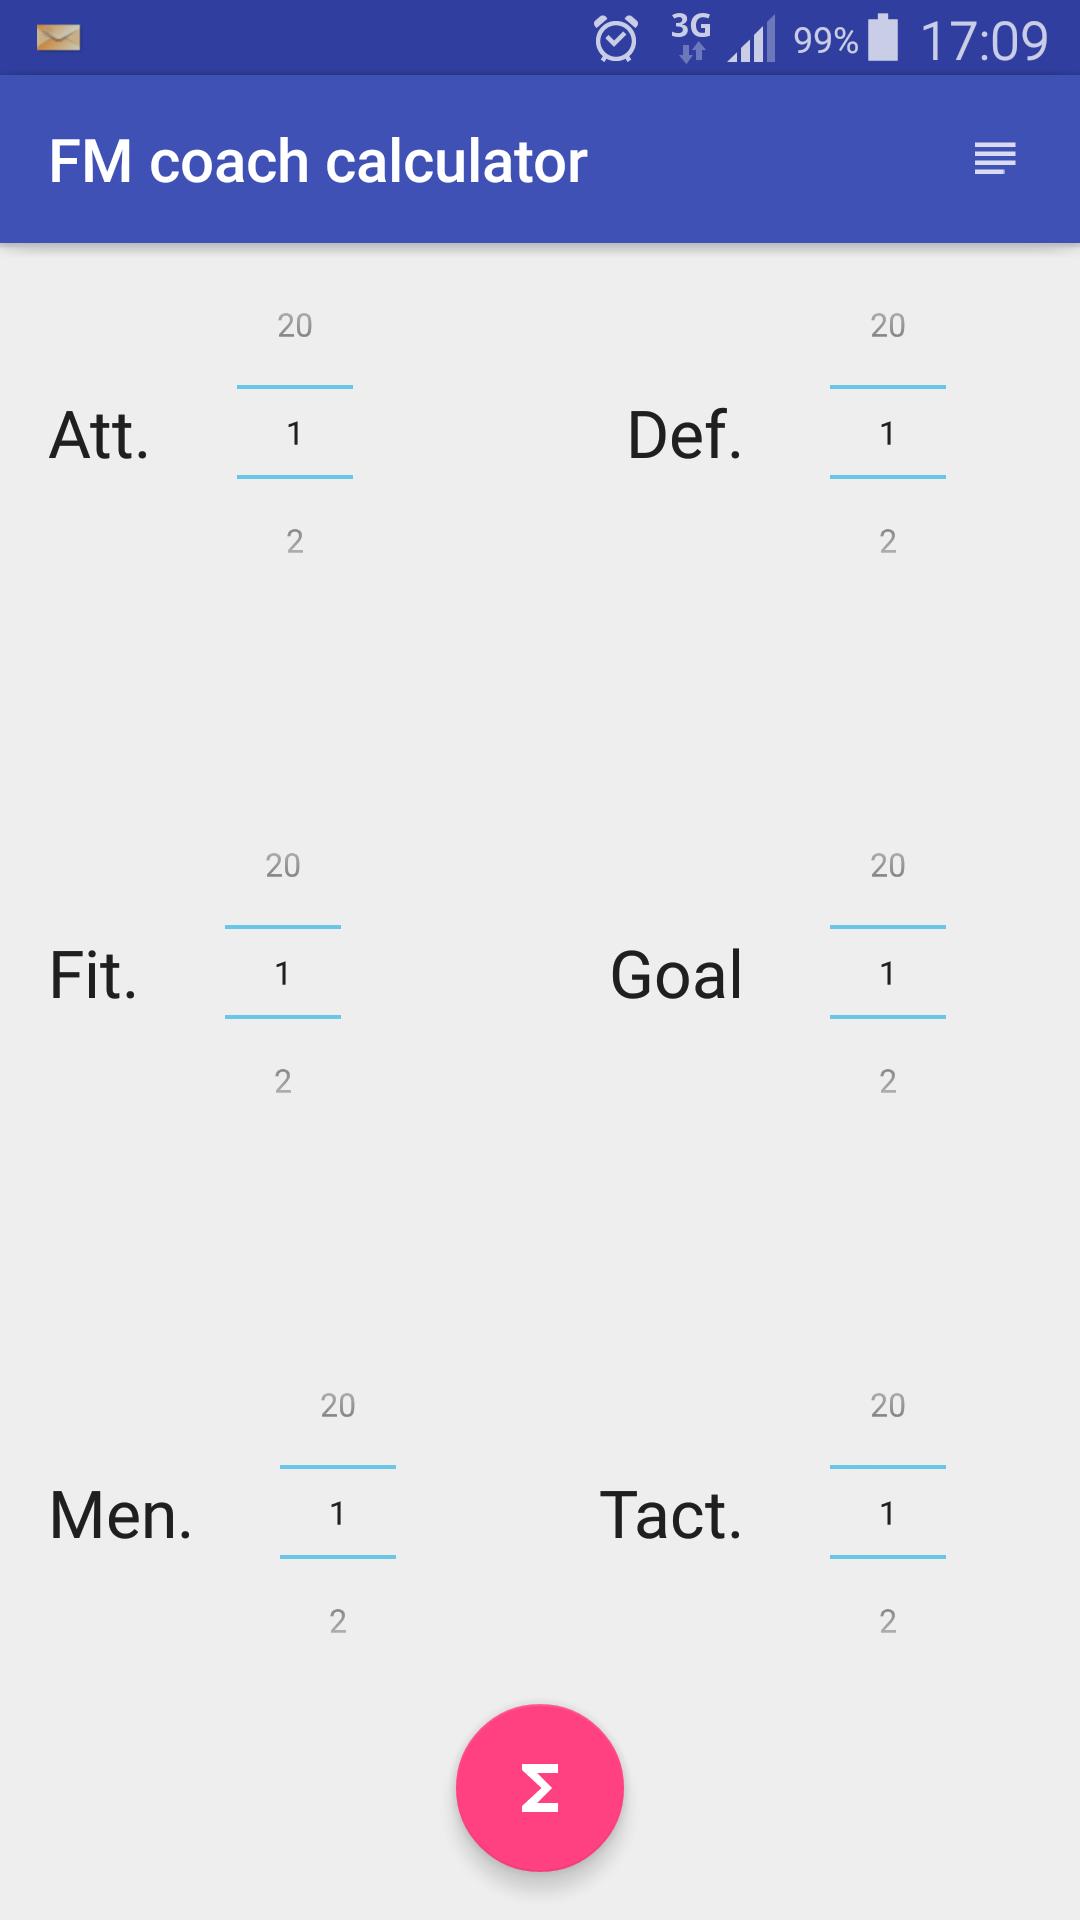 FM coach calculator for Android - APK Download